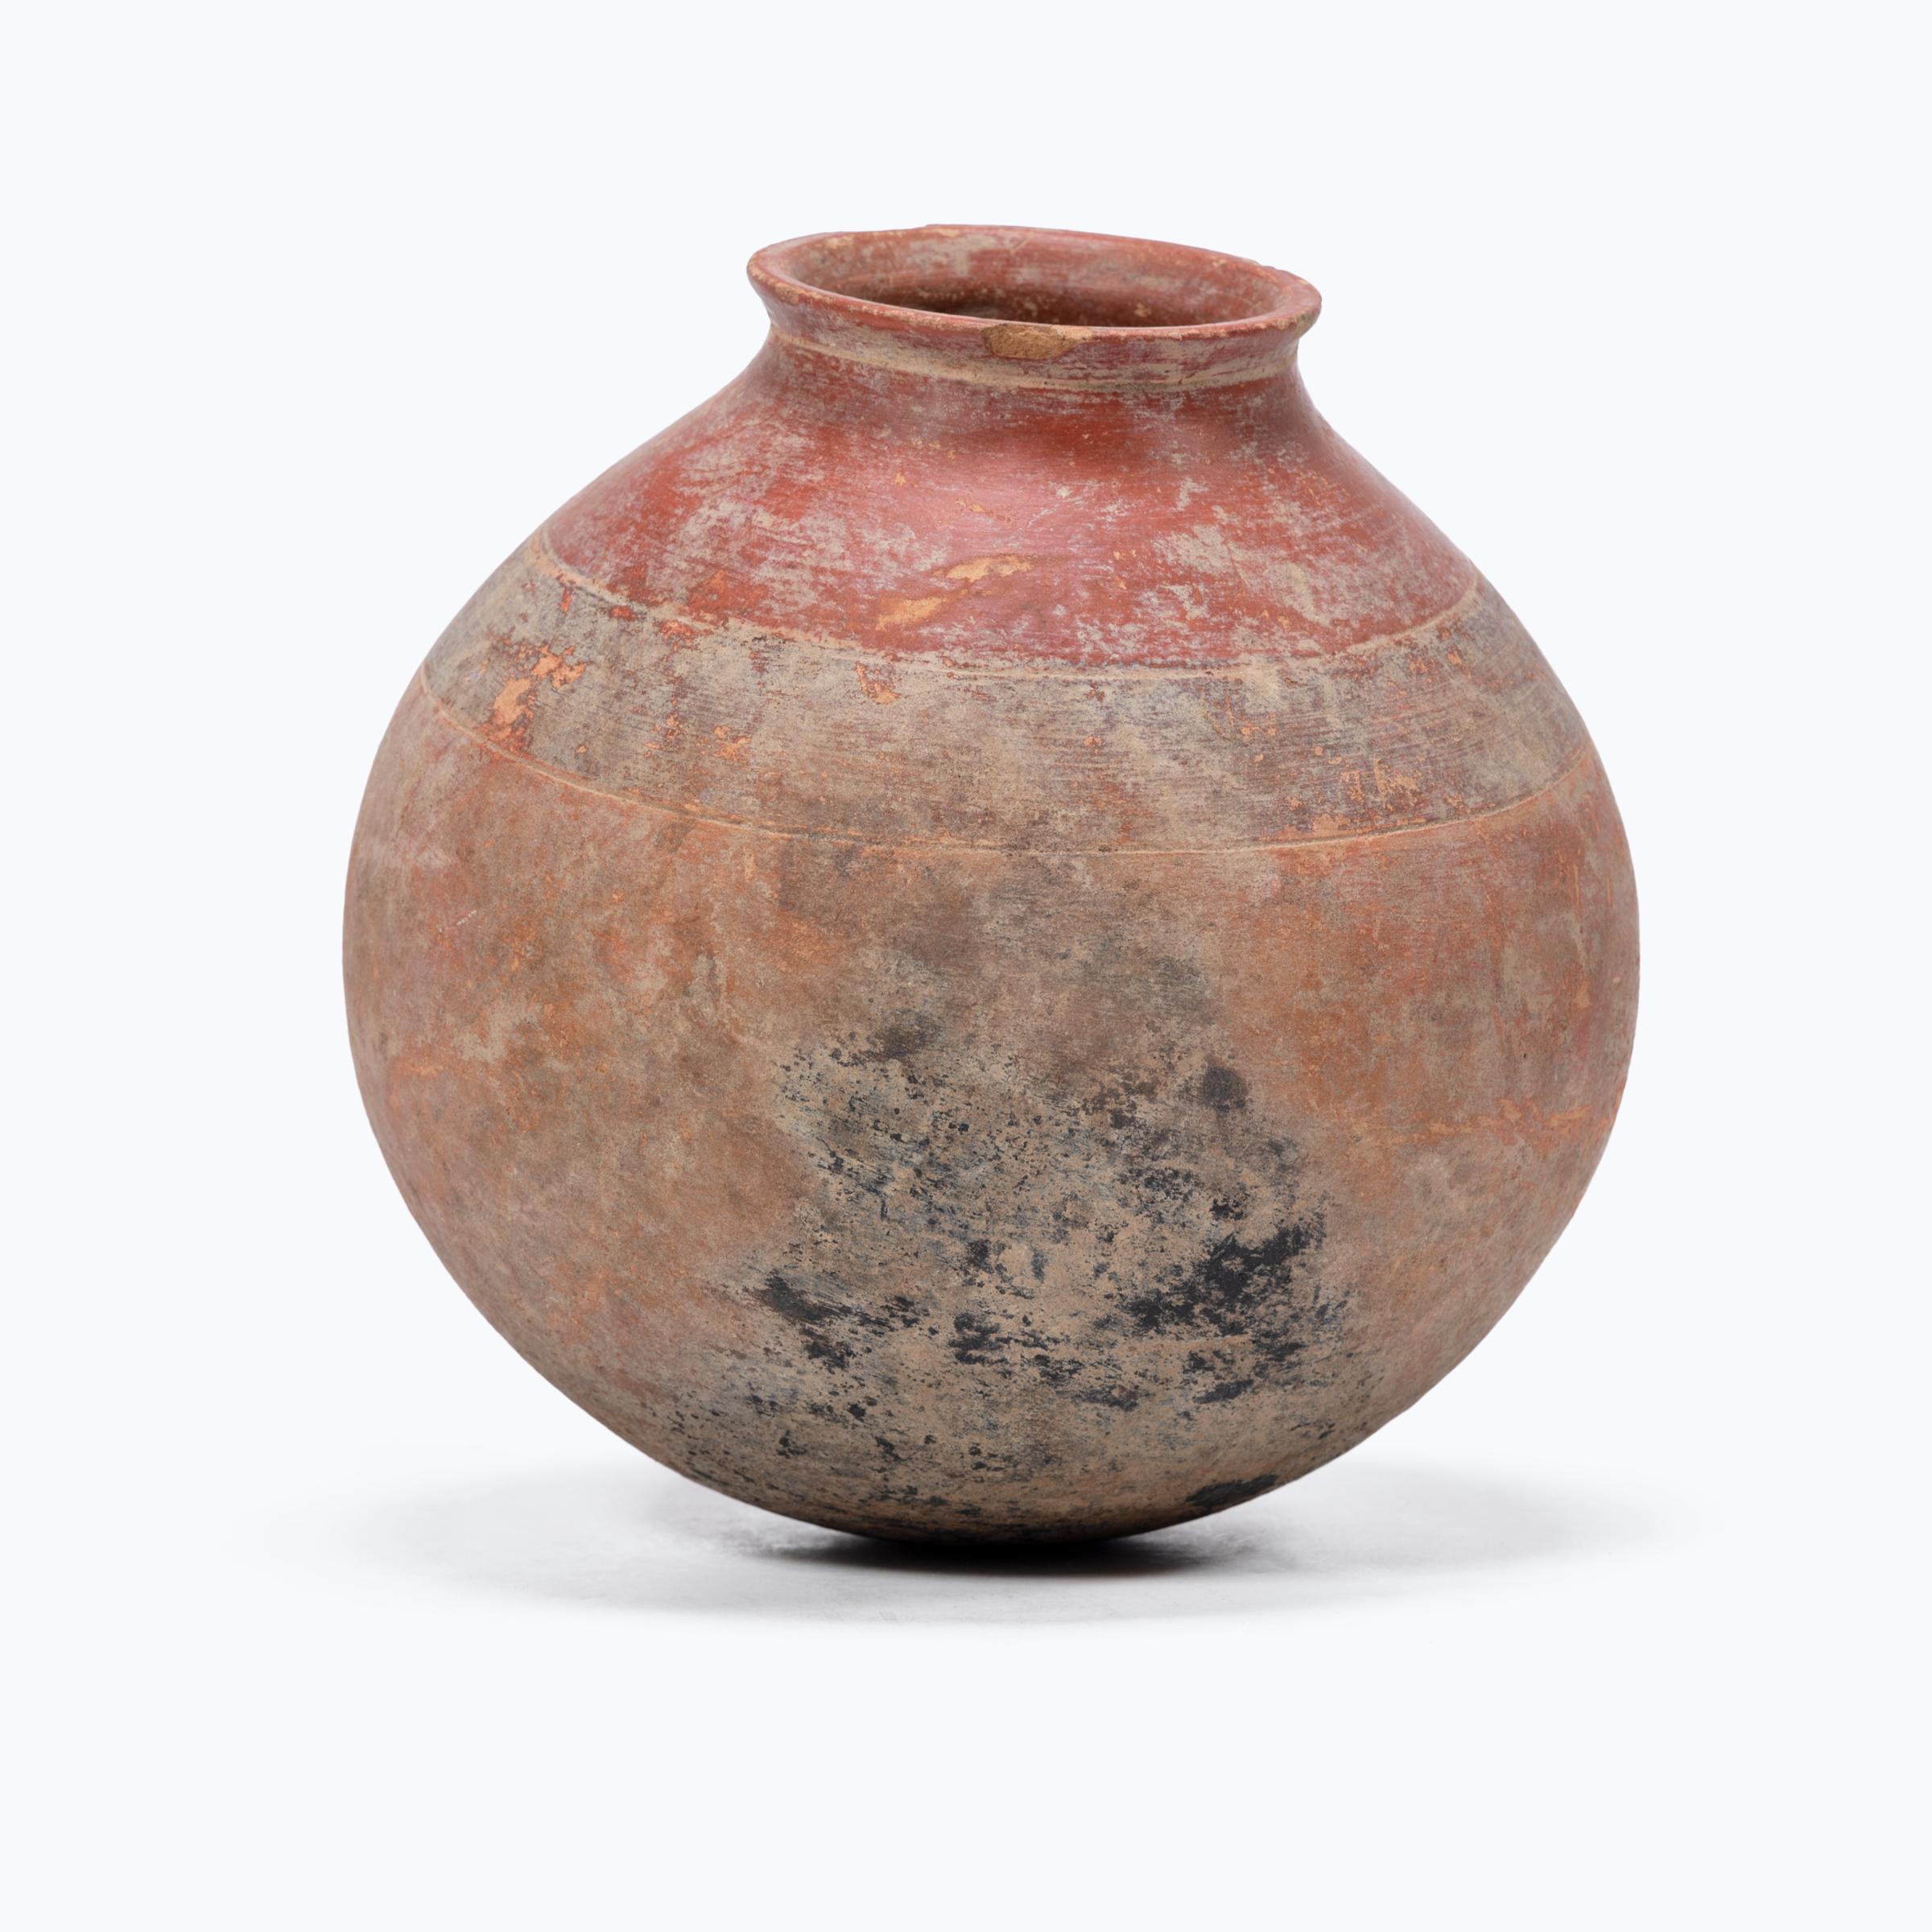 Covered in a beautifully worn red clay slip, this hand-formed ceramic pot is an excavated redware vessel from West Africa. Horizontal bands of colored slip partition the vessel's rounded form, interrupted by dark smoke residue clouding the surface.